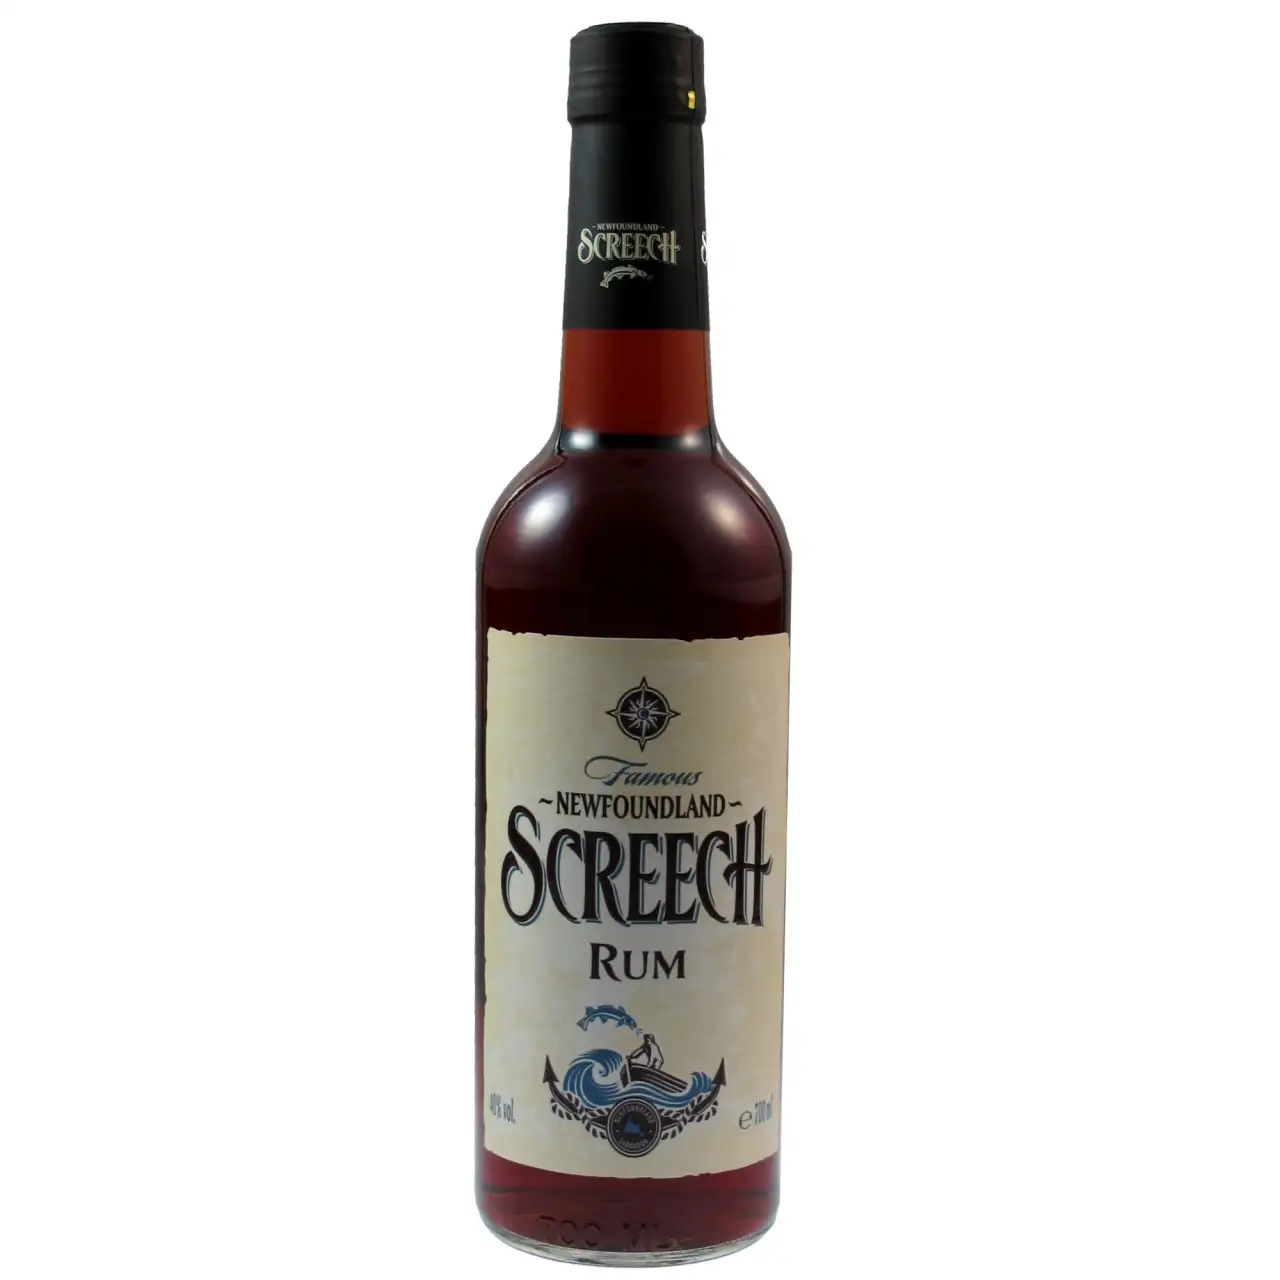 Image of the front of the bottle of the rum Screech Dark Rum